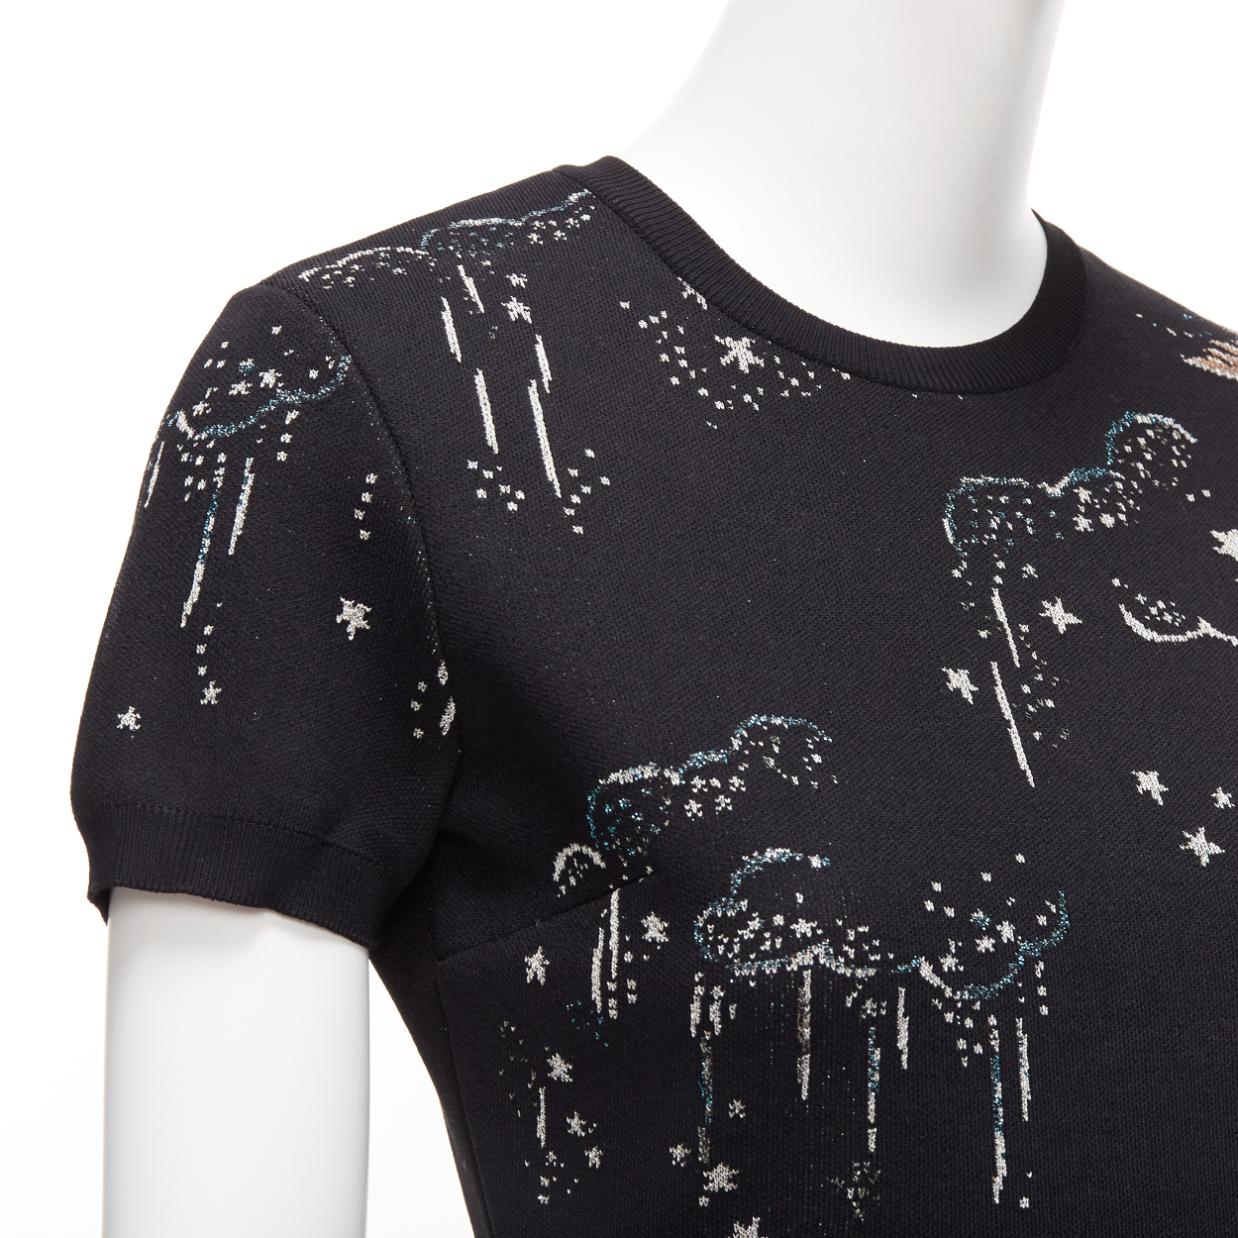 VALENTINO black glitter cloud star jacquard short sleeve fit flare dress S
Reference: YIKK/A00065
Brand: Valentino
Designer: Pier Paolo Piccioli
Material: Viscose, Blend
Color: Black, Silver
Pattern: Star
Closure: Zip
Extra Details: An atmospheric